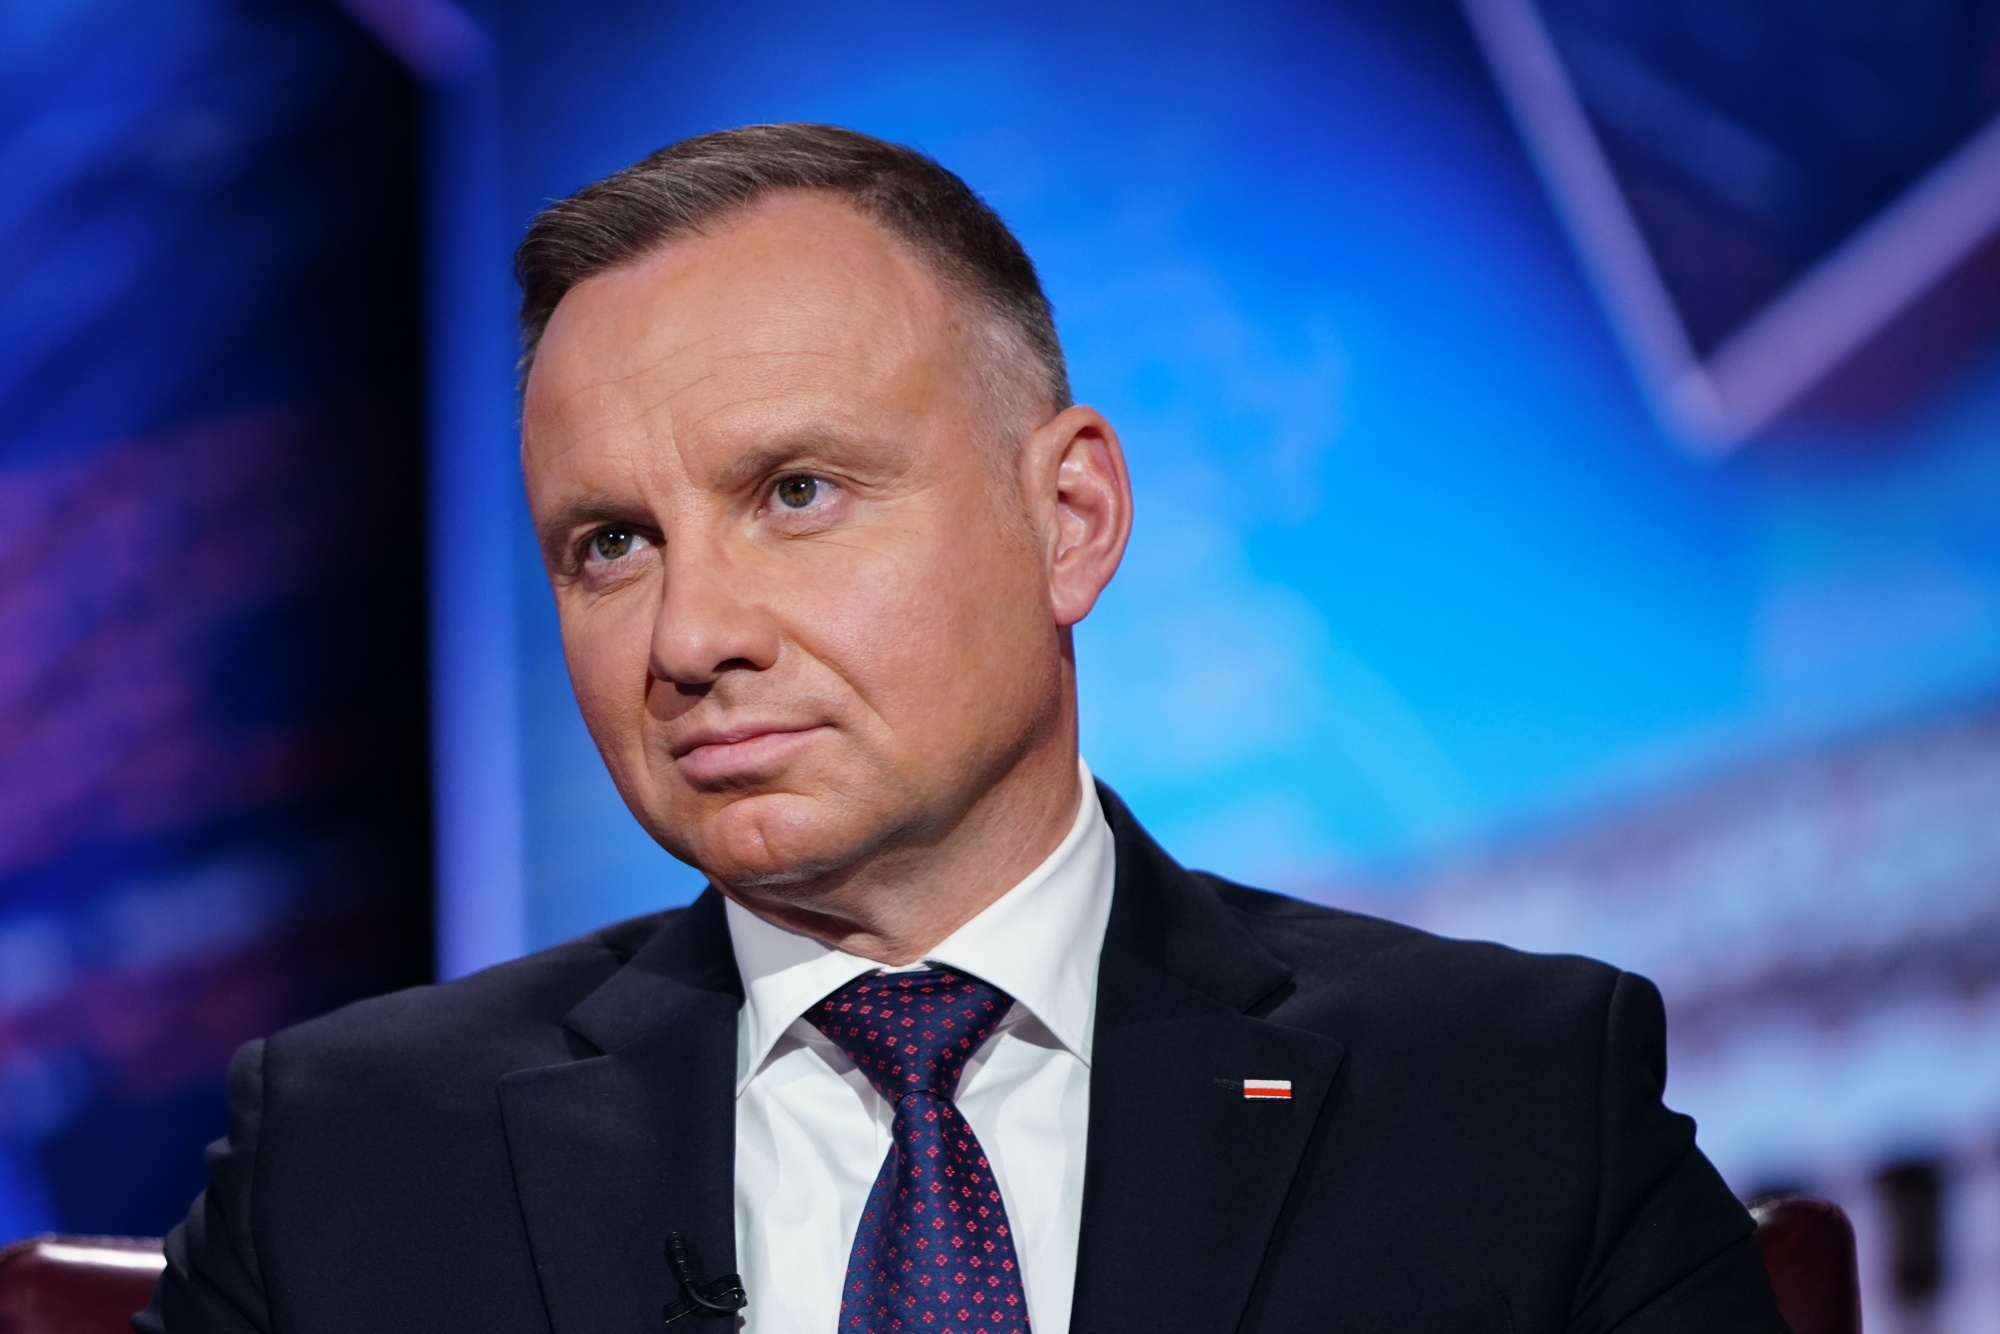 Polish President Duda Appeals for Calm in Tensions With Ukraine - Bloomberg